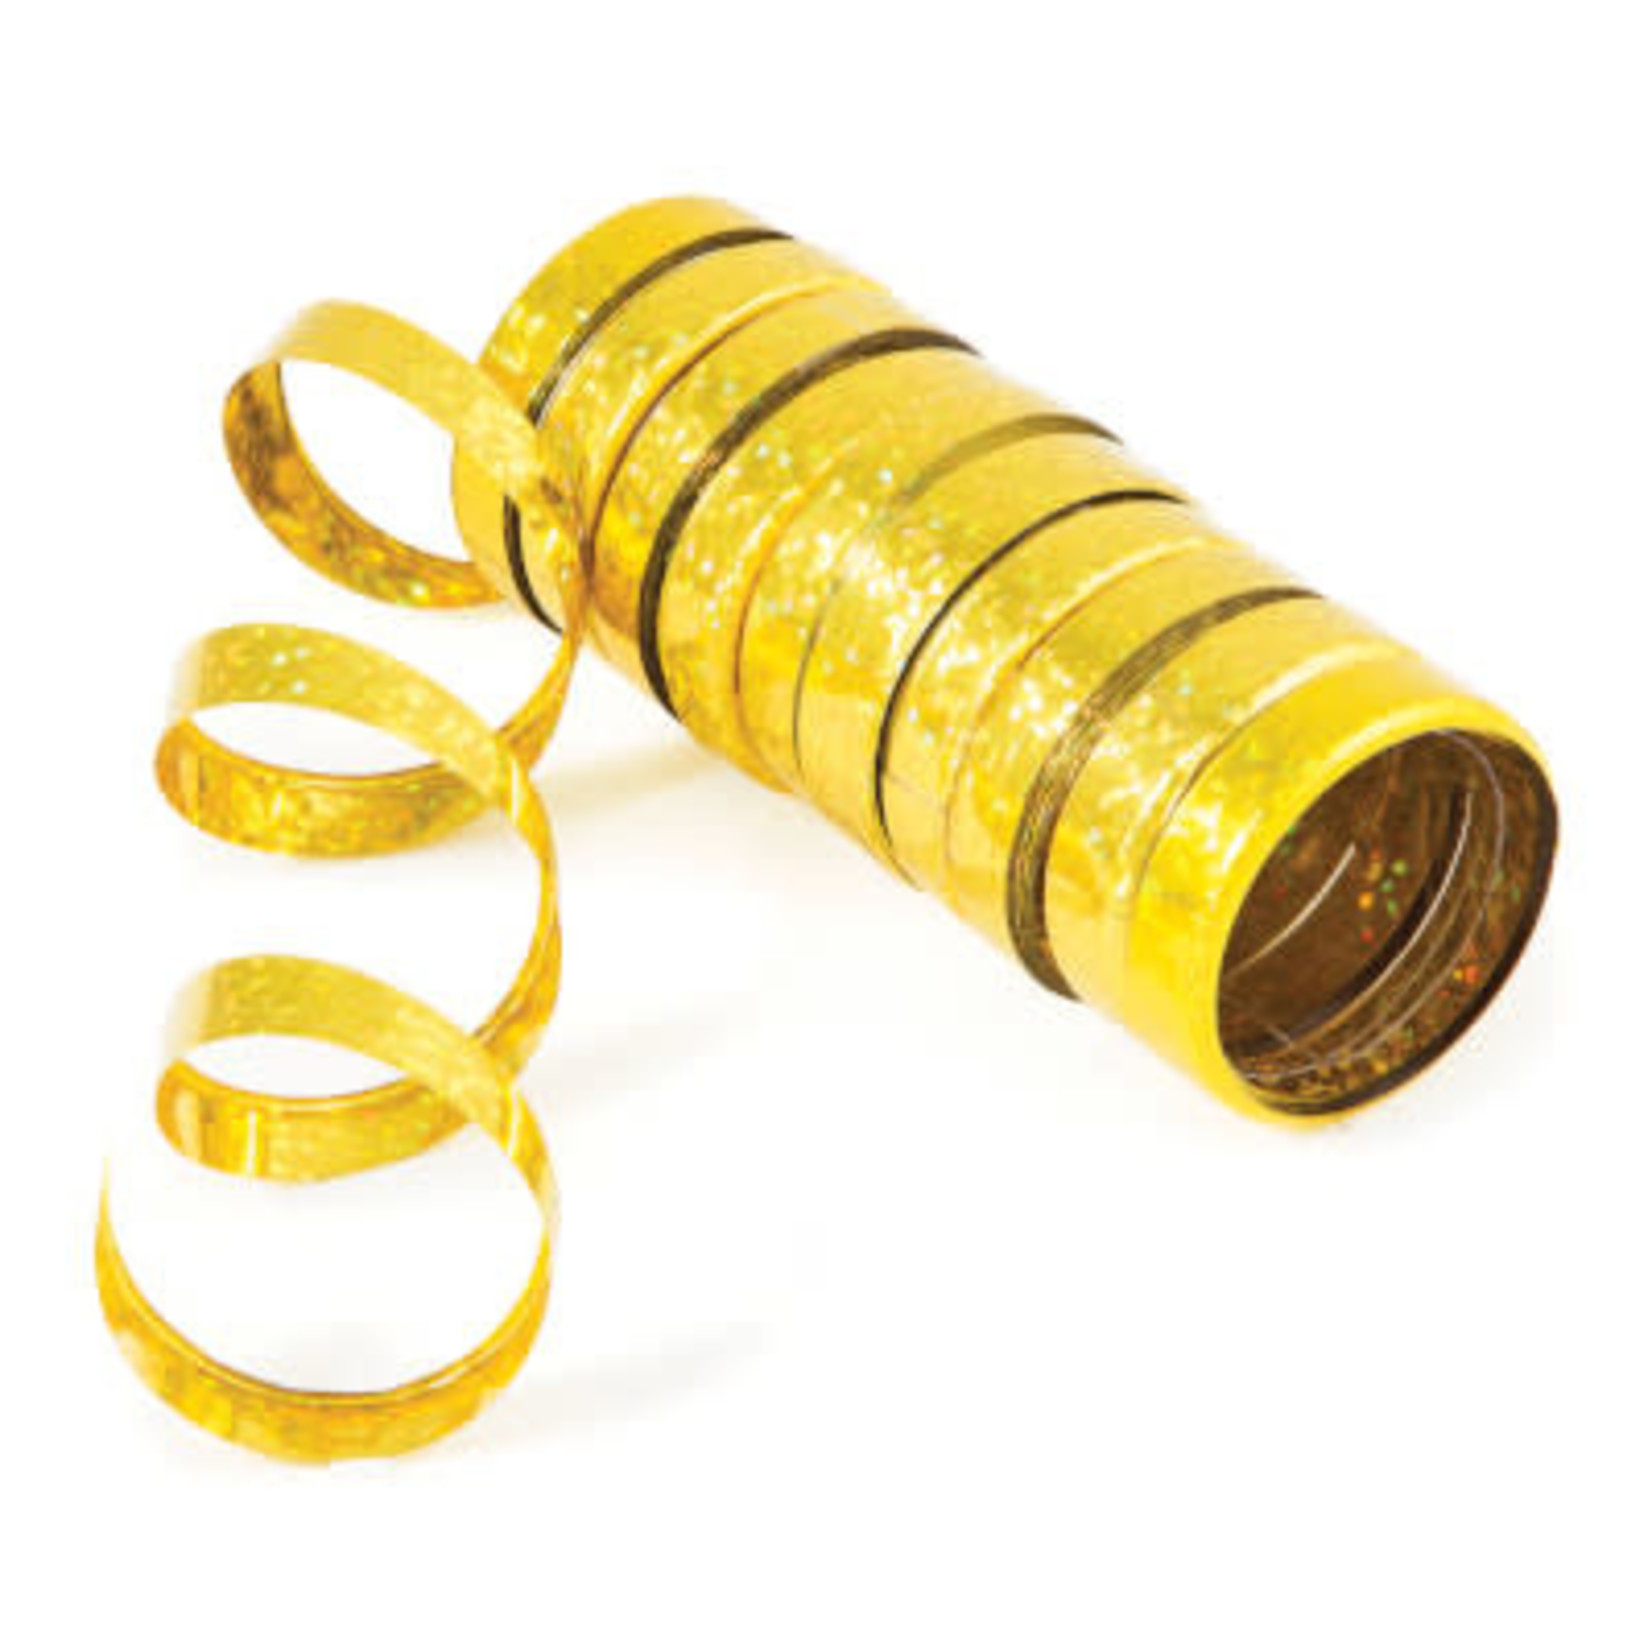 Gold Serpentine Streamers - 6.5ft. - Party Adventure